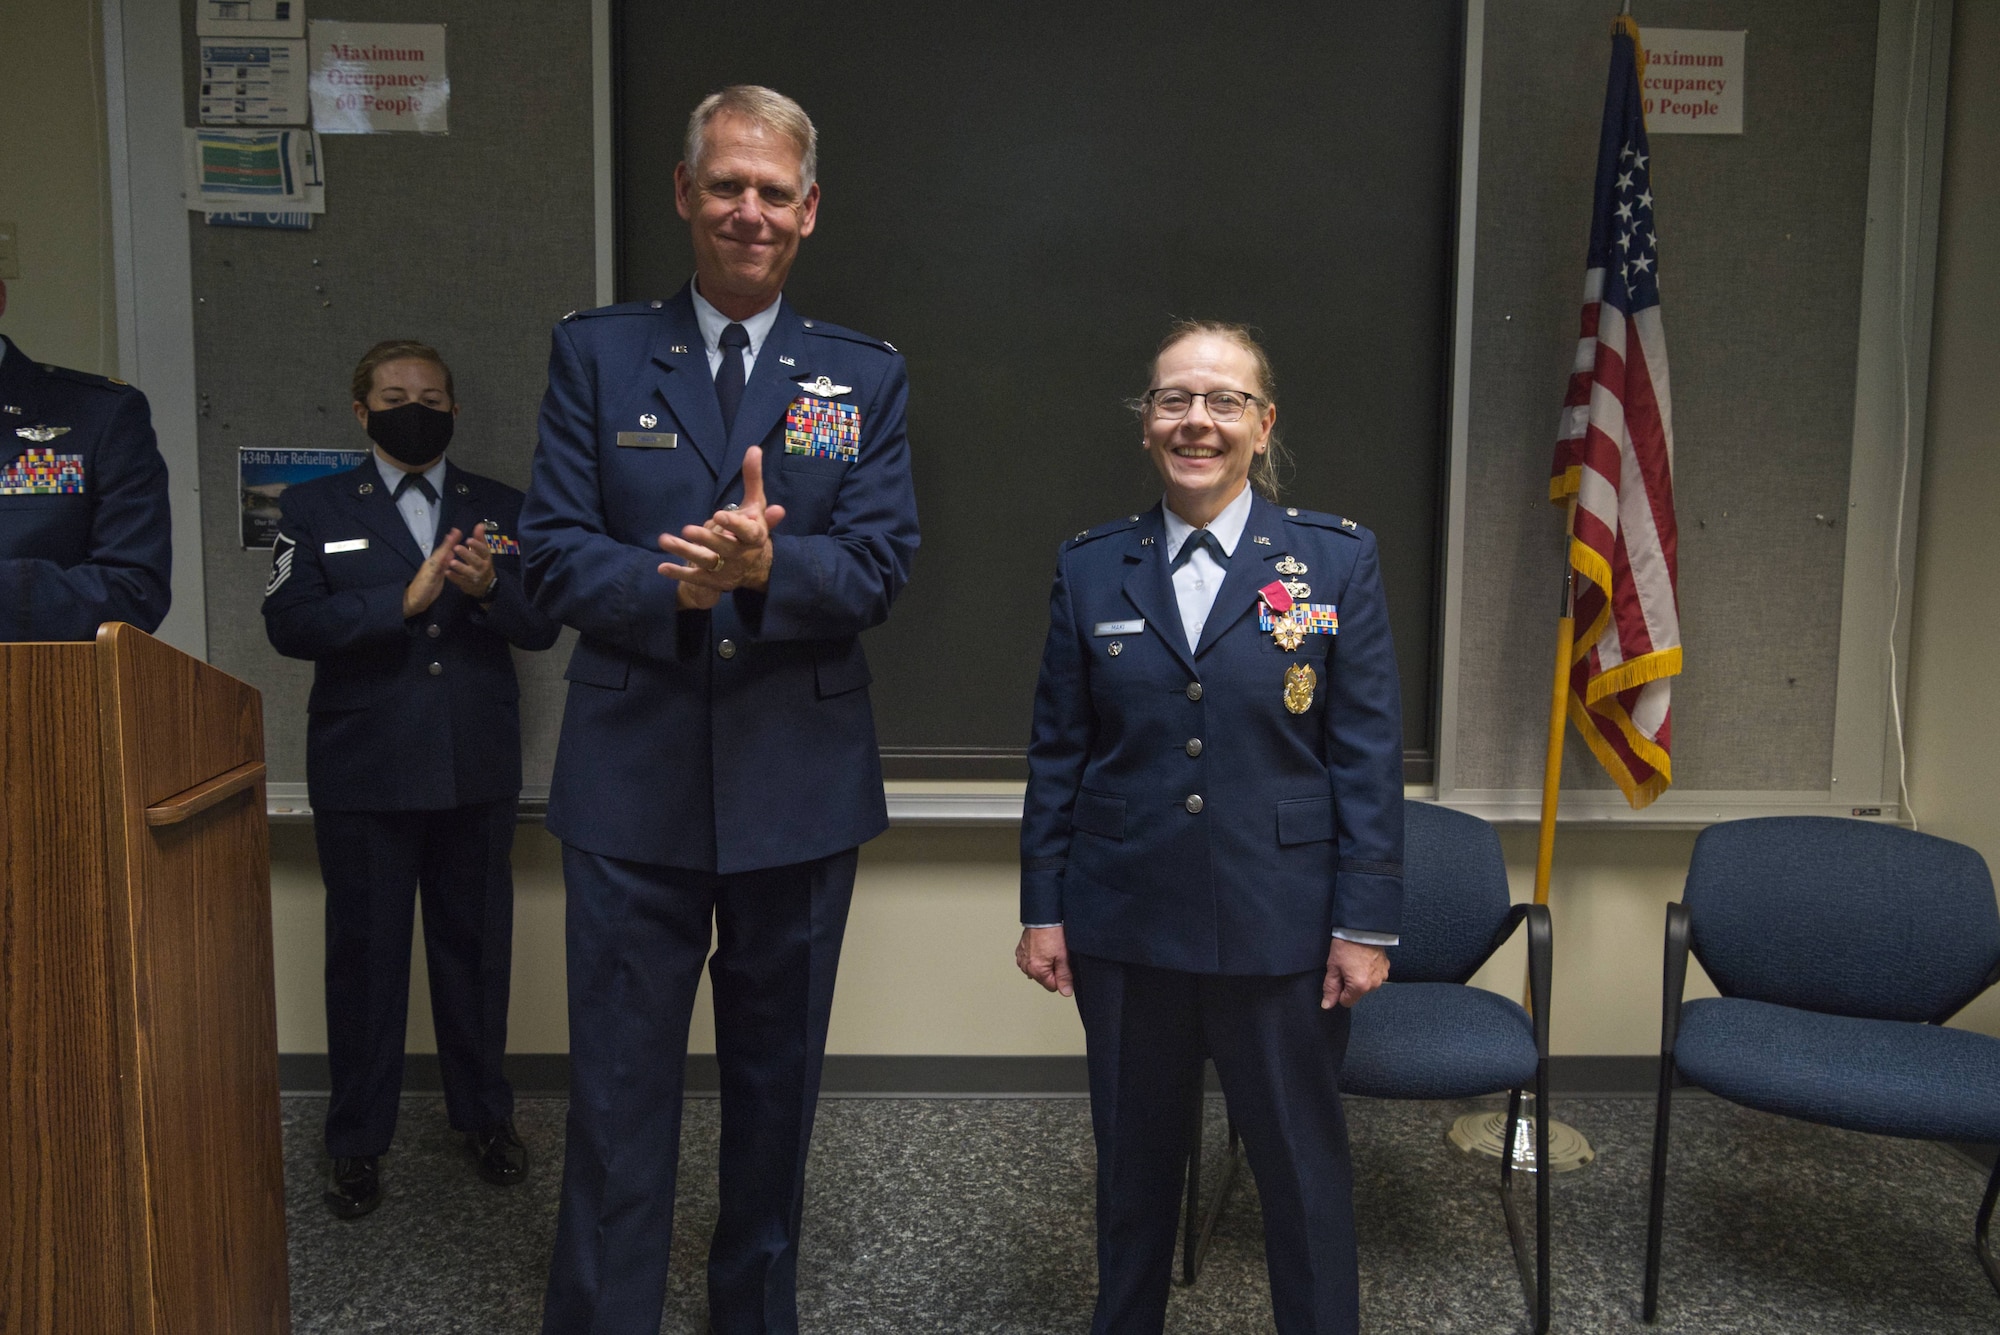 Col. Larry Shaw, 434th Air Refueling Wing commander, poses for a photo with Col. Susan Maki, 434th ARW inspector general, at her retirement ceremony at Grissom Air Reserve Base, Ind., Sept. 12, 2020. Maki retired after 32 years of service in the Minnesota Air Guard and Air Force Reserve. (U.S. Air Force Photo / A1C Harrison Withrow)